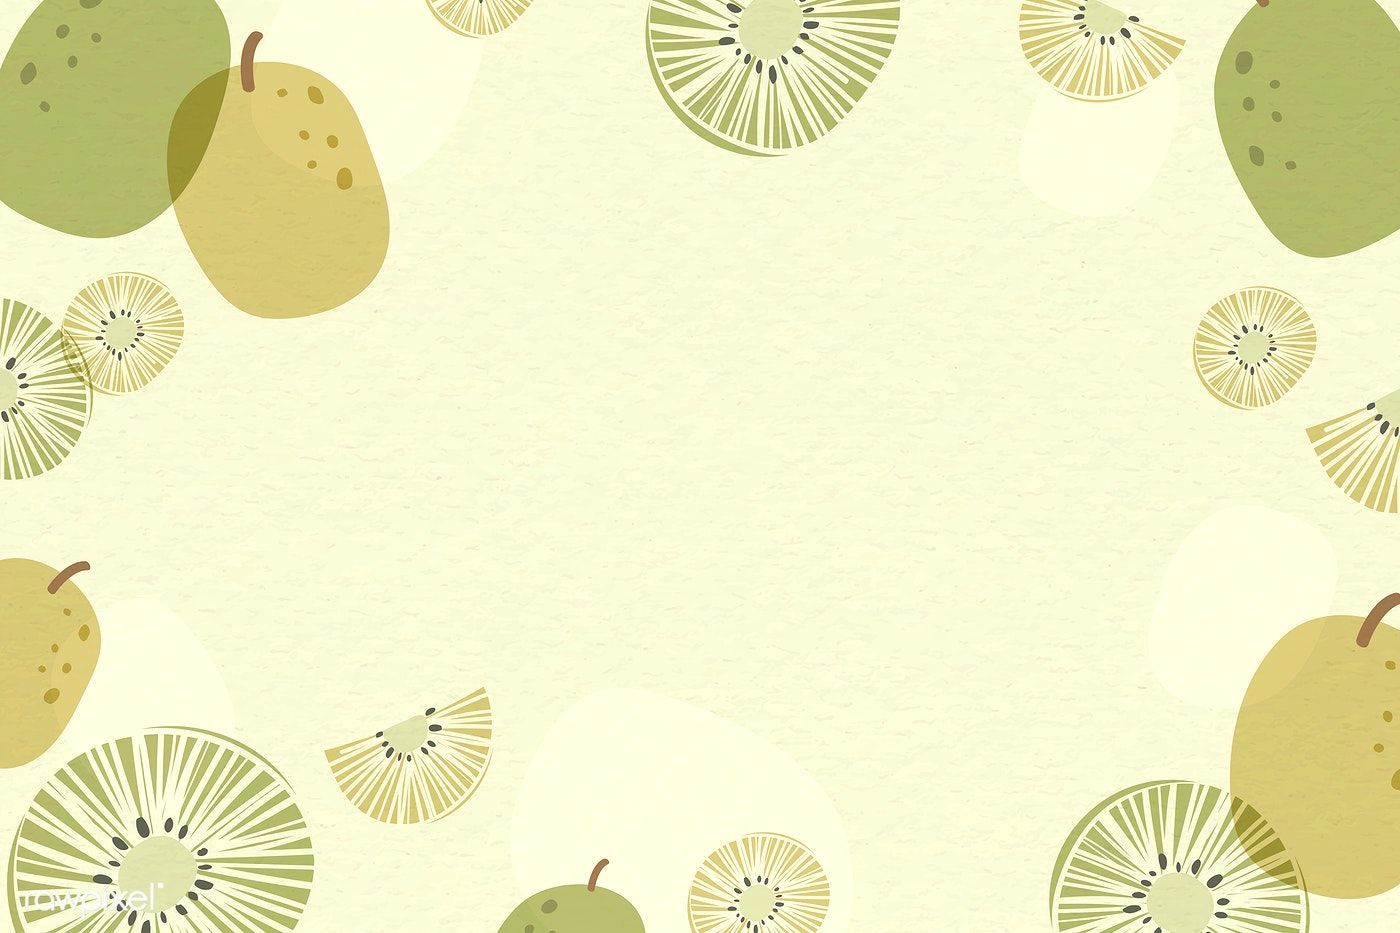 Kiwi patterned background with design space vector / wan. Artsy background, Poster background design, Graphic poster art